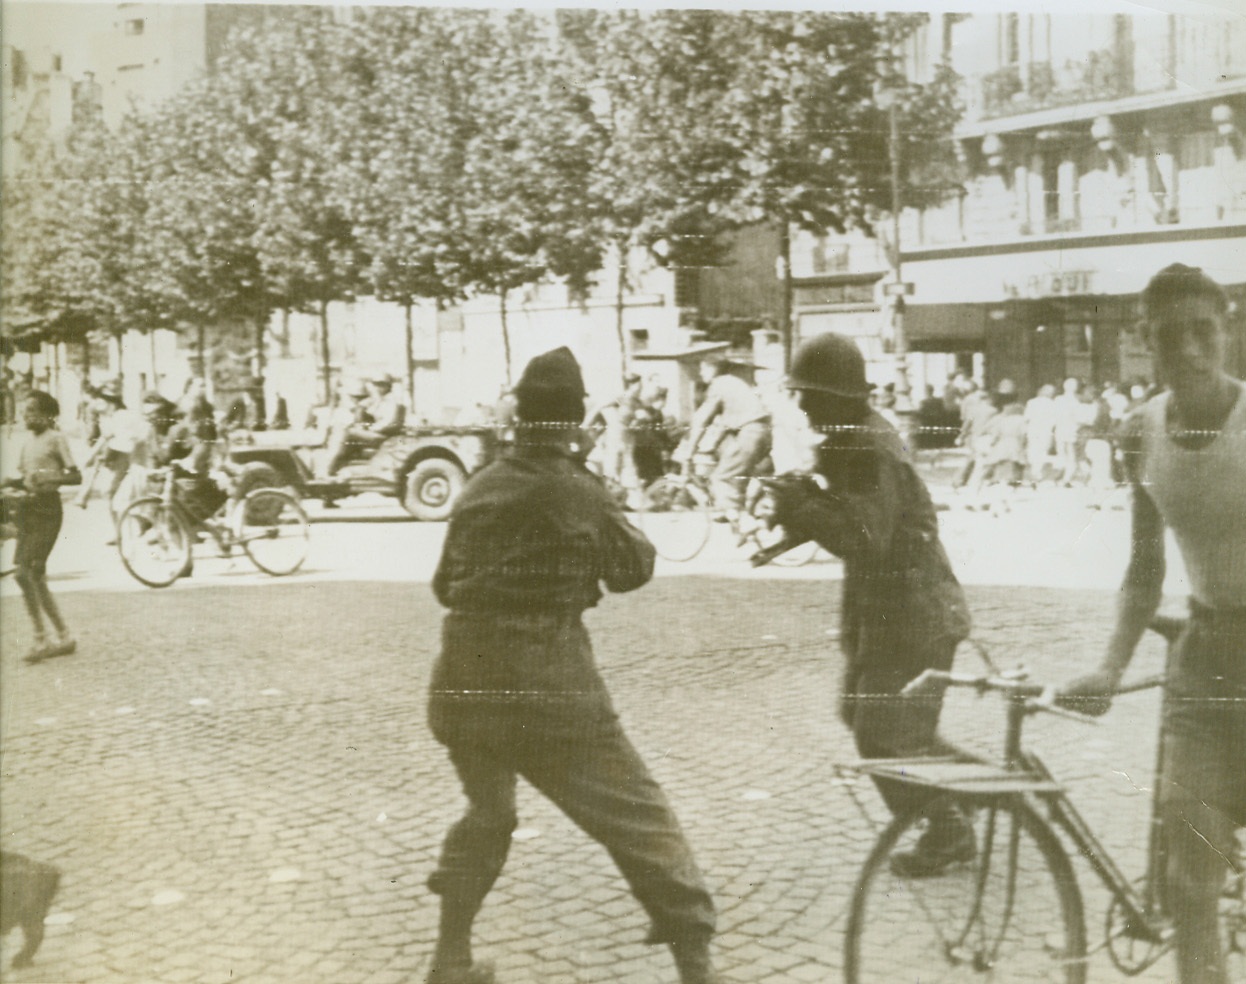 Paris Celebration Ends in Riot, 8/27/1944. Paris, France—A few minutes before the scene of a triumphal procession celebrating the liberation of Paris, this street in the vicinity of the Eiffel Tower is now filled with people scrambling to escape the rifle fire of Nazis and collaborationists quartered in nearby buildings. It was during this procession that an attempt was made on the life of Gen. de Gaulle. The photographers in the foreground, taking pictures as the people scramble for shelter, are probably war picture pool correspondents.  Credit: ACME photo via Signal Corps;